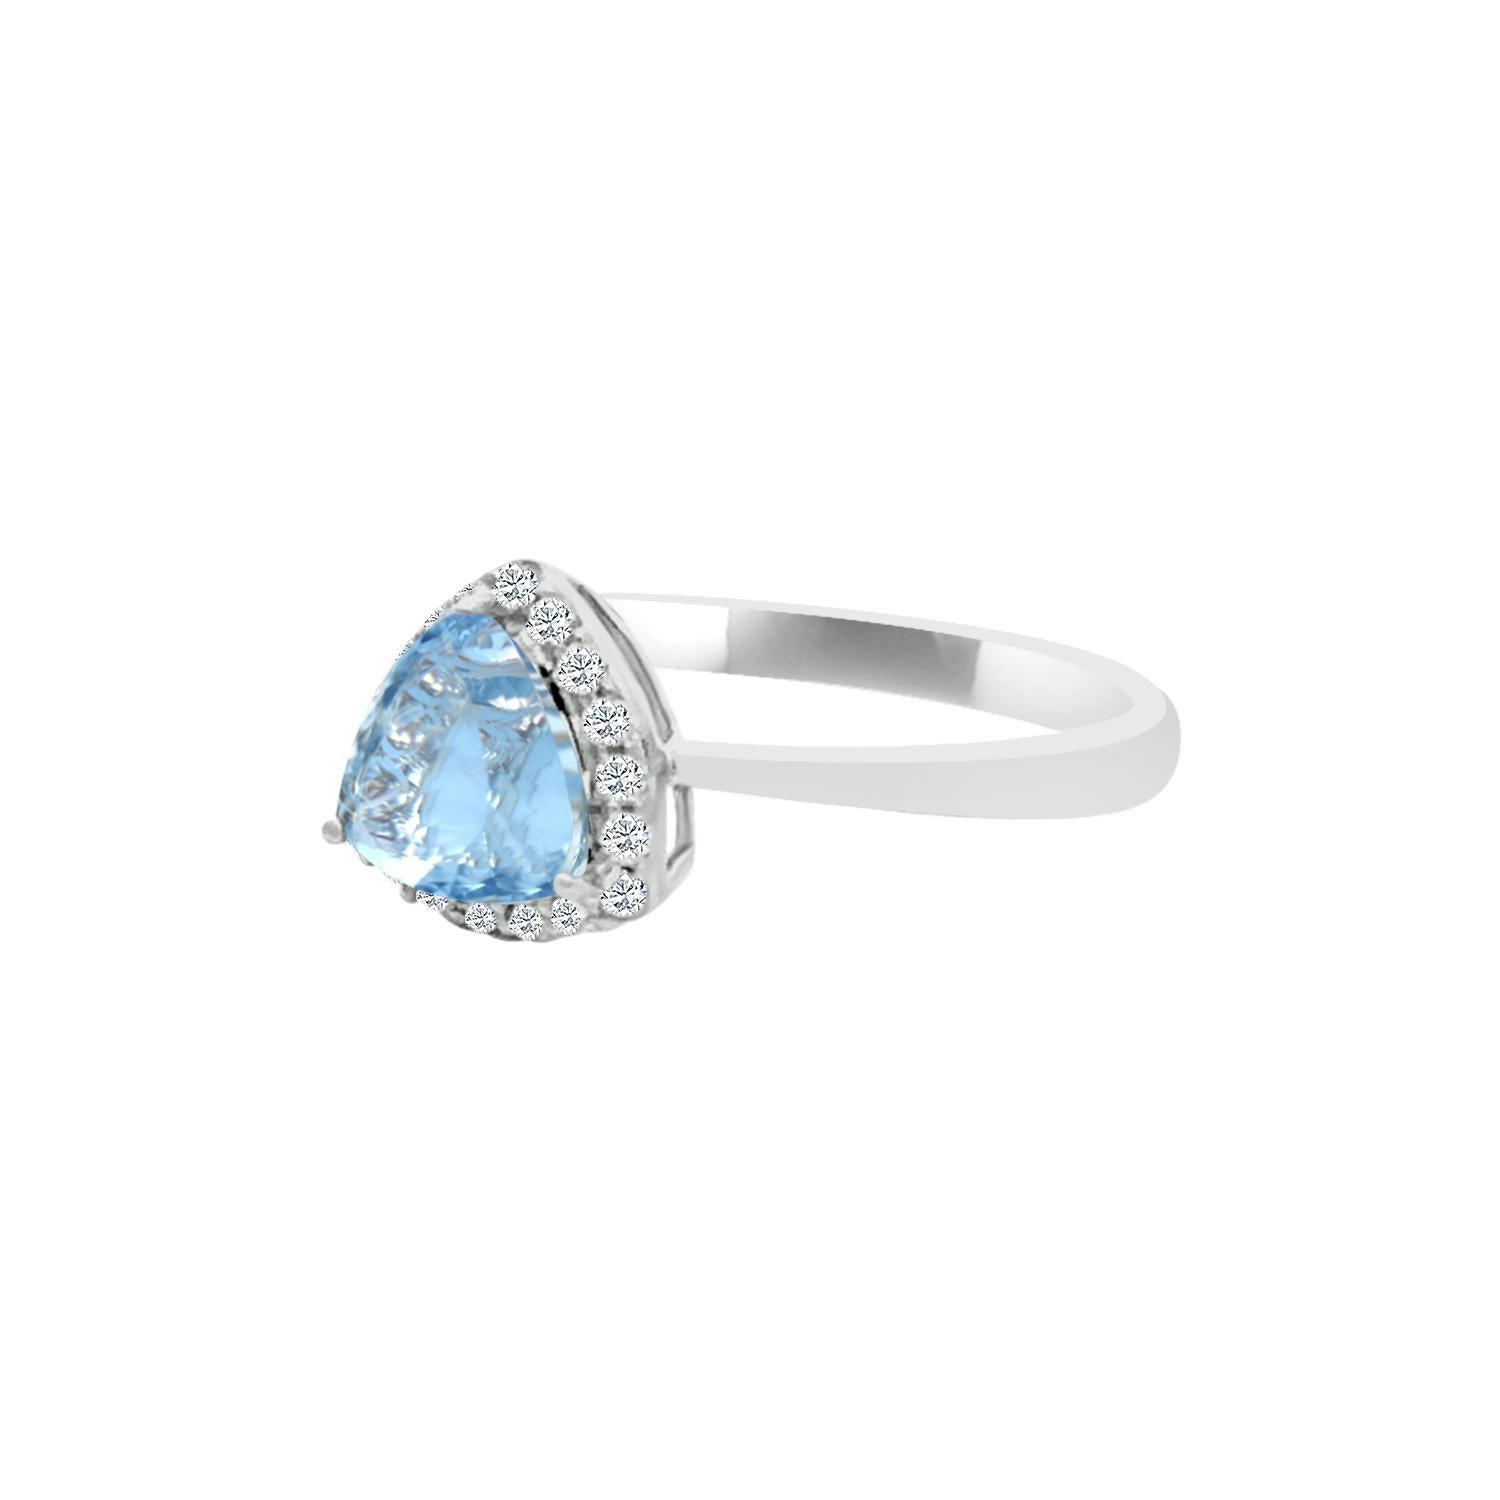 Highlight Your Fine Taste Of Jewelry With The Combination Of Centre Trillion Shape Aquamarine With Diamond Embellishment Which Is Sure To Get You Compliments. 
This Beautiful 6mm Aquamarine Ring Is Made In 14k White Gold. This Mesmerizing Ring Is